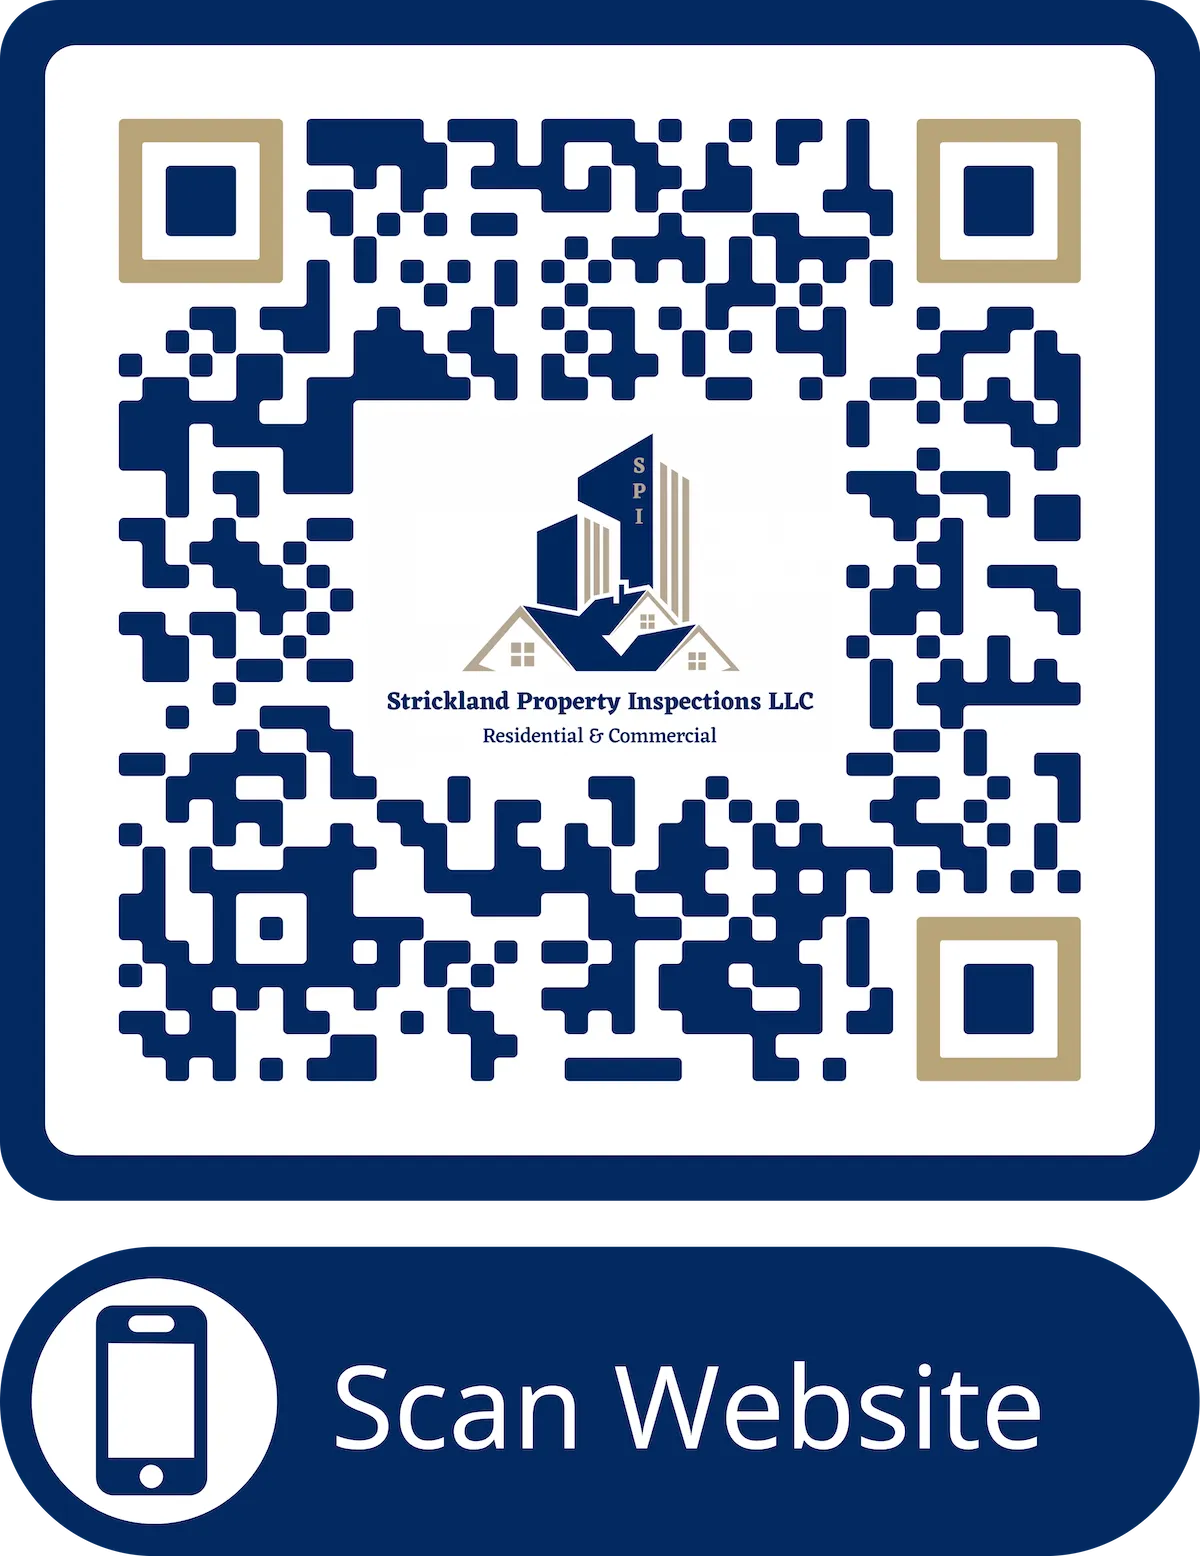 Strickland Property Inspections QR Code